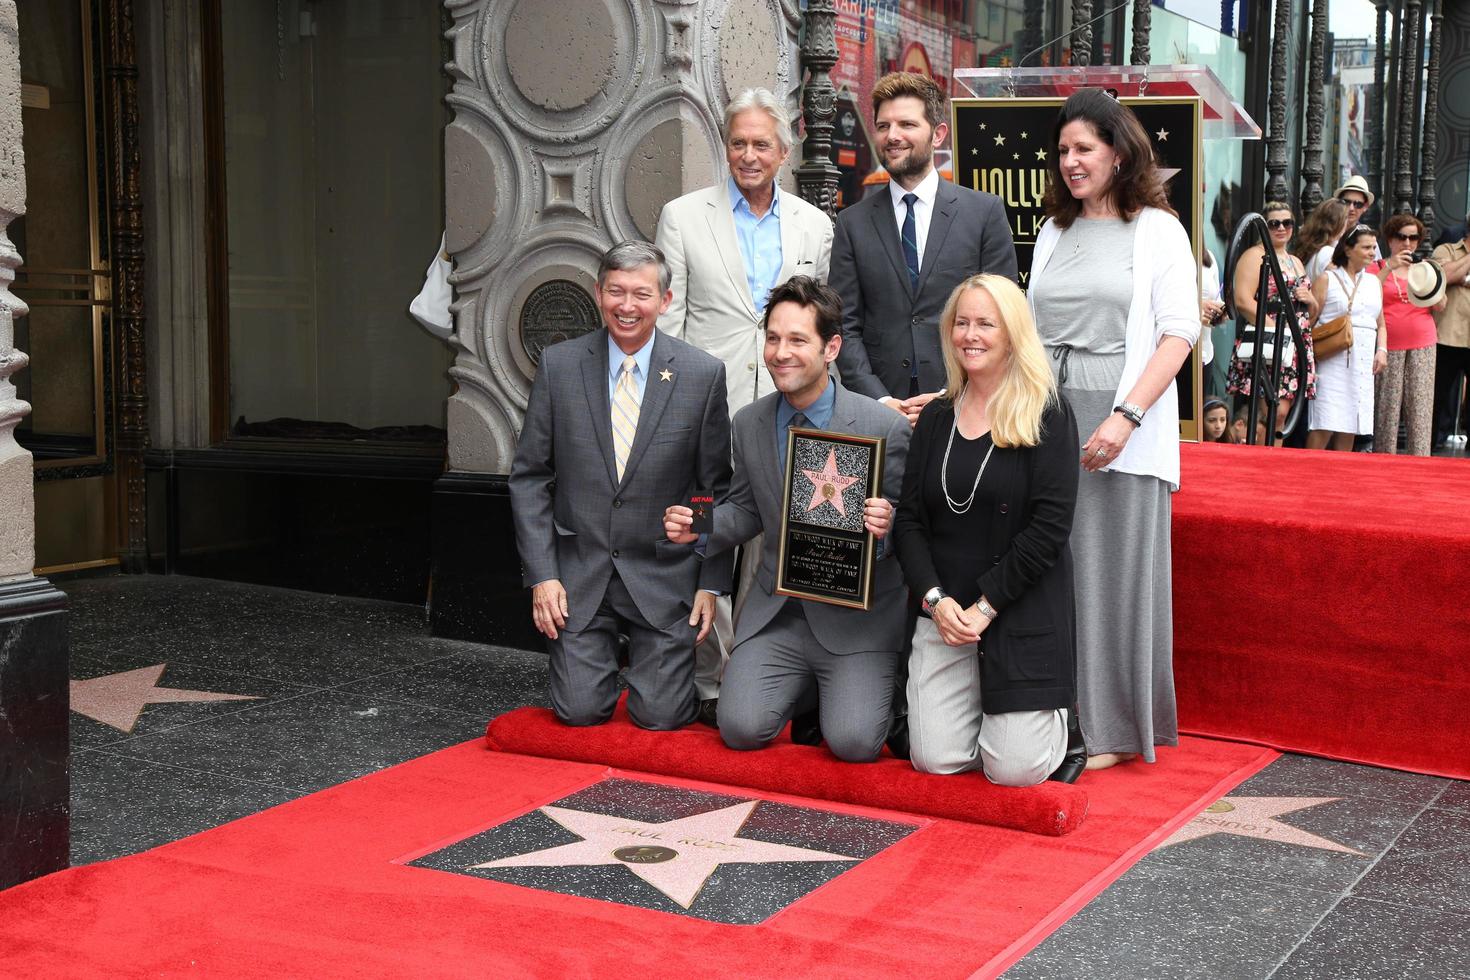 vLOS ANGELES, JUL 1 - Michael Douglas, Adam Scott, Paul Rudd, Chamber Officials at the Paul Rudd Hollywood Walk of Fame Star Ceremony at the El Capitan Theater Sidewalk on July 1, 2015 in Los Angeles, CA photo